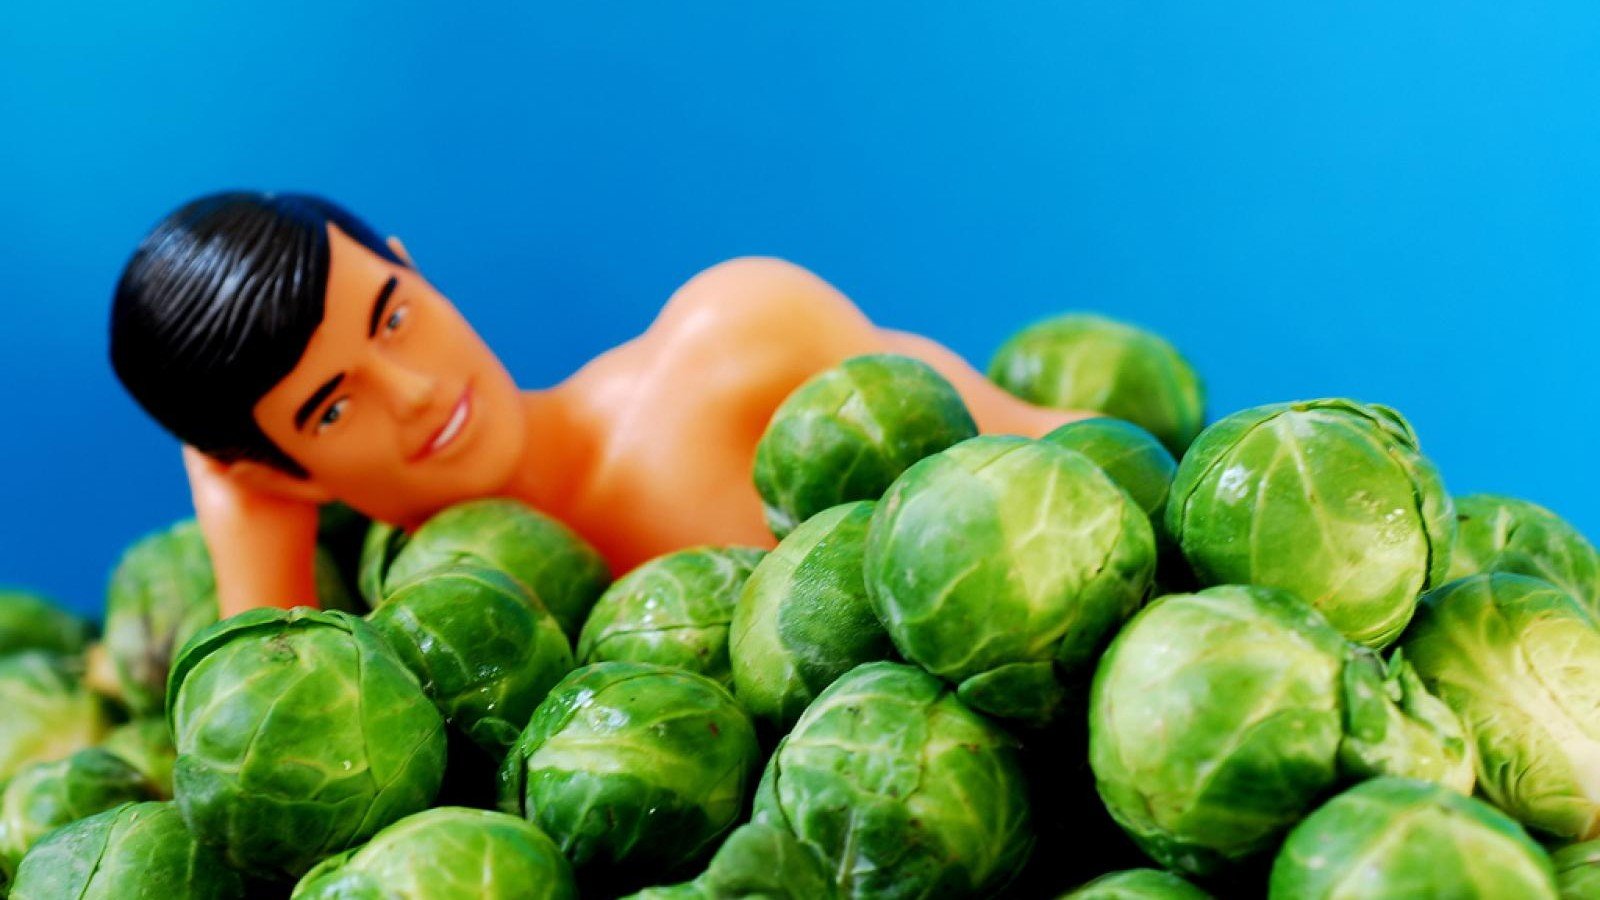 Brussels sprouts Wallpaper